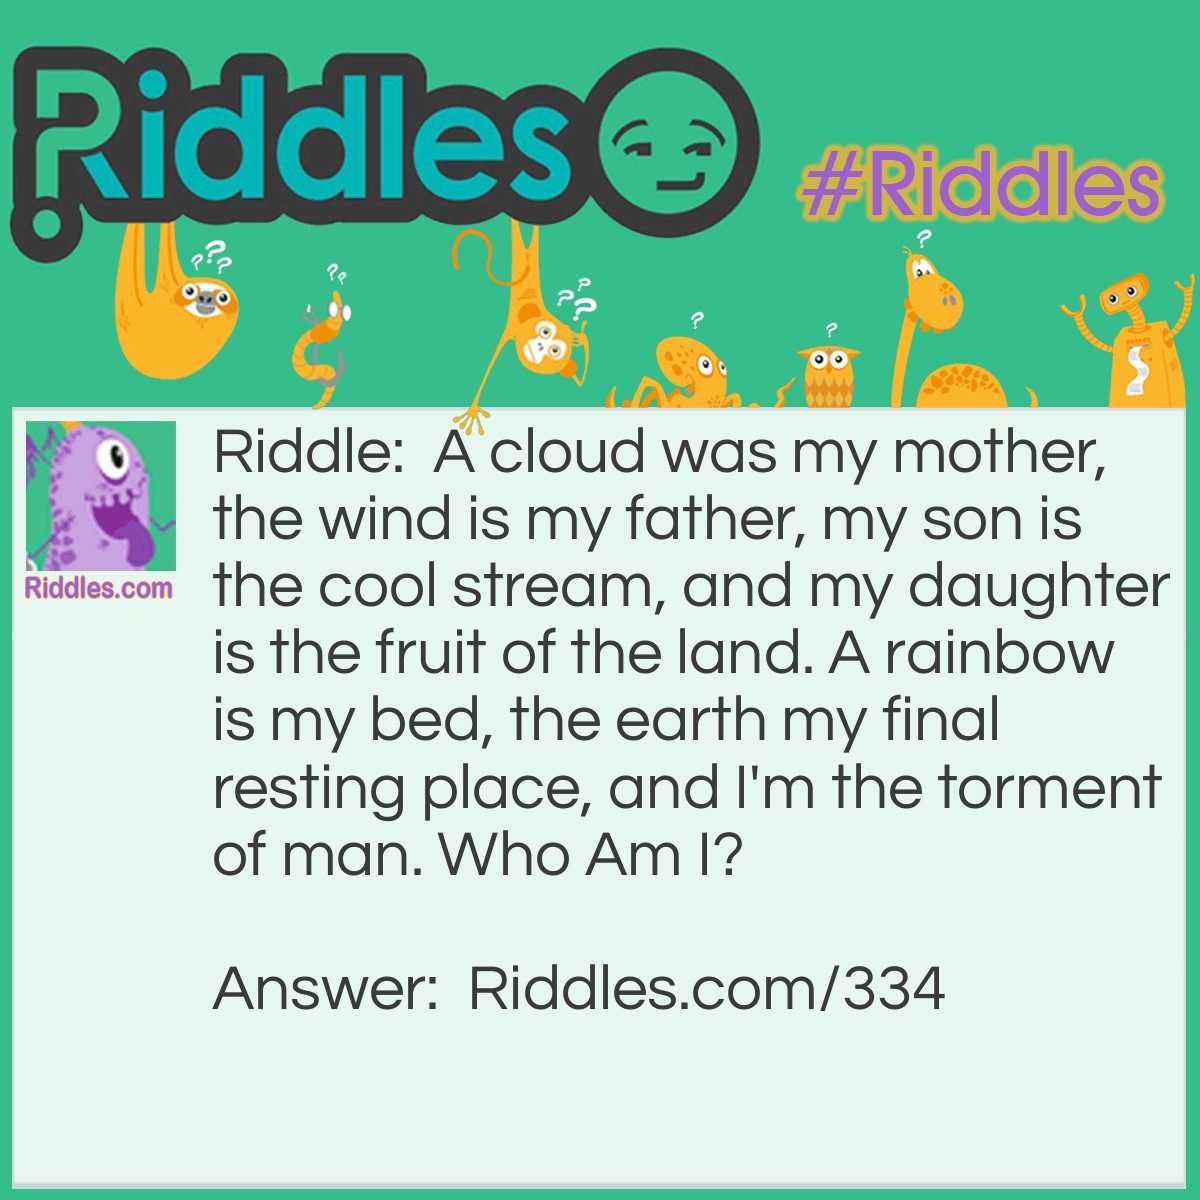 Riddle: A cloud was my mother, the wind is my father, my son is the cool stream, and my daughter is the fruit of the land. A rainbow is my bed, the earth my final resting place, and I'm the torment of man. Who Am I? Answer: Rain.